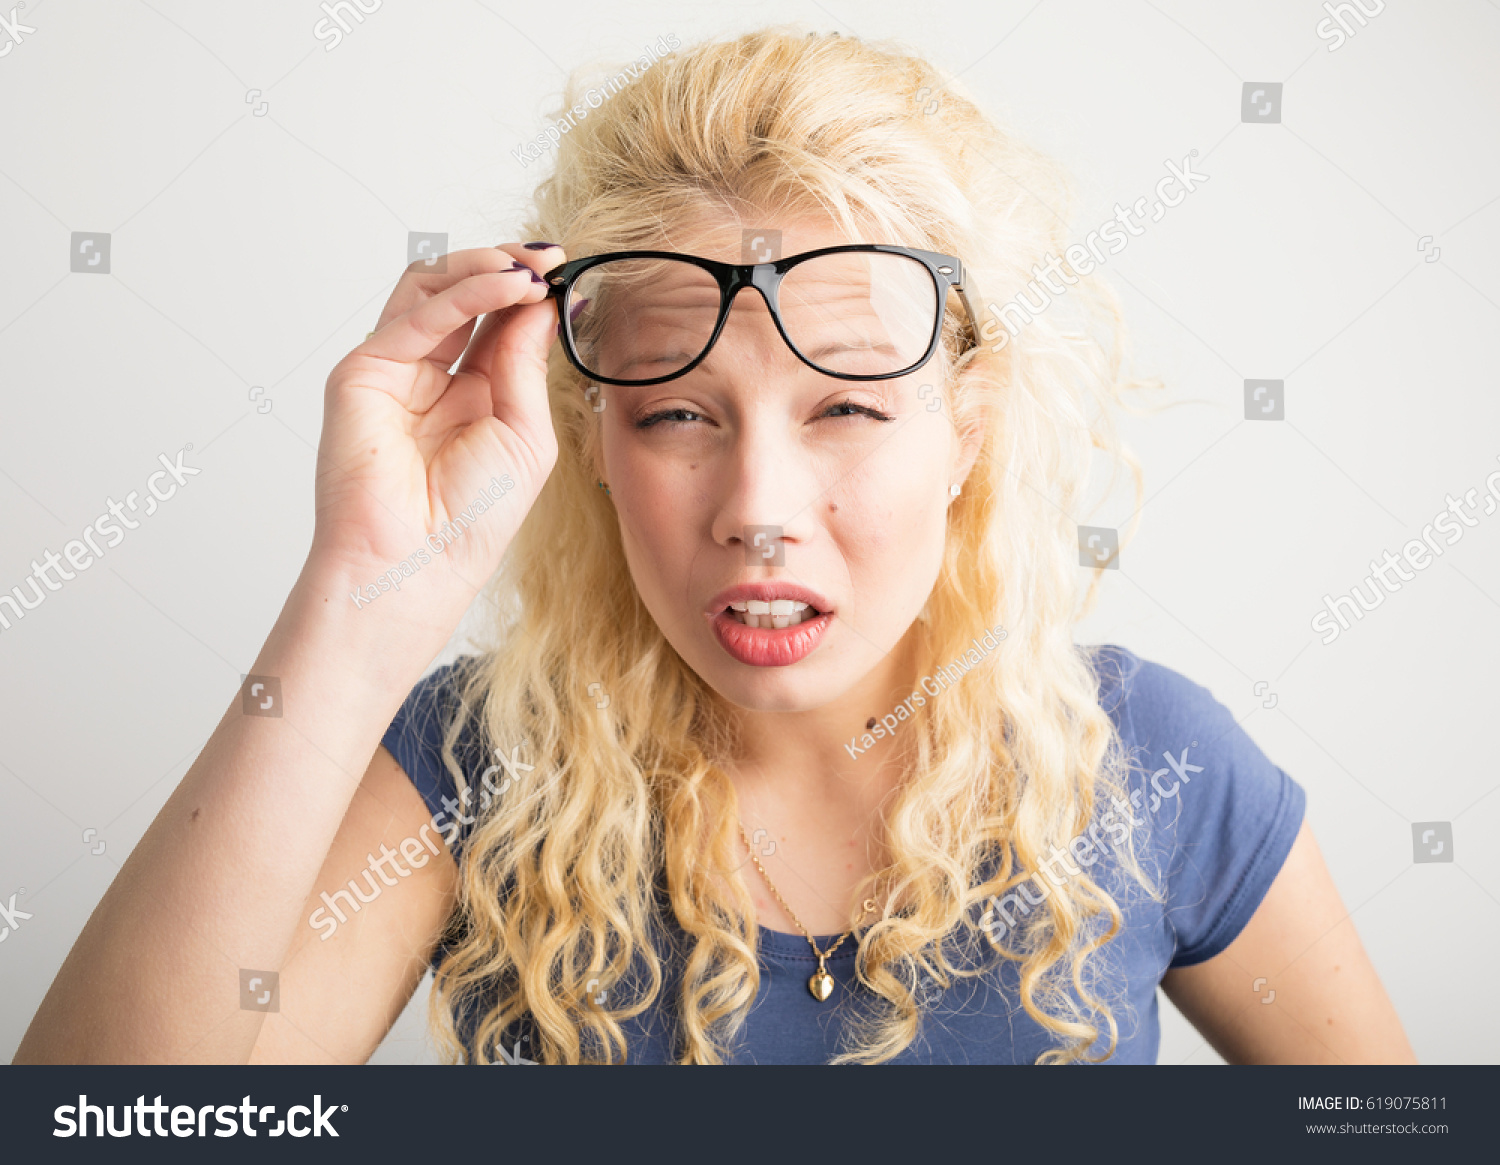 Woman with her glasses lifted up can't see #619075811